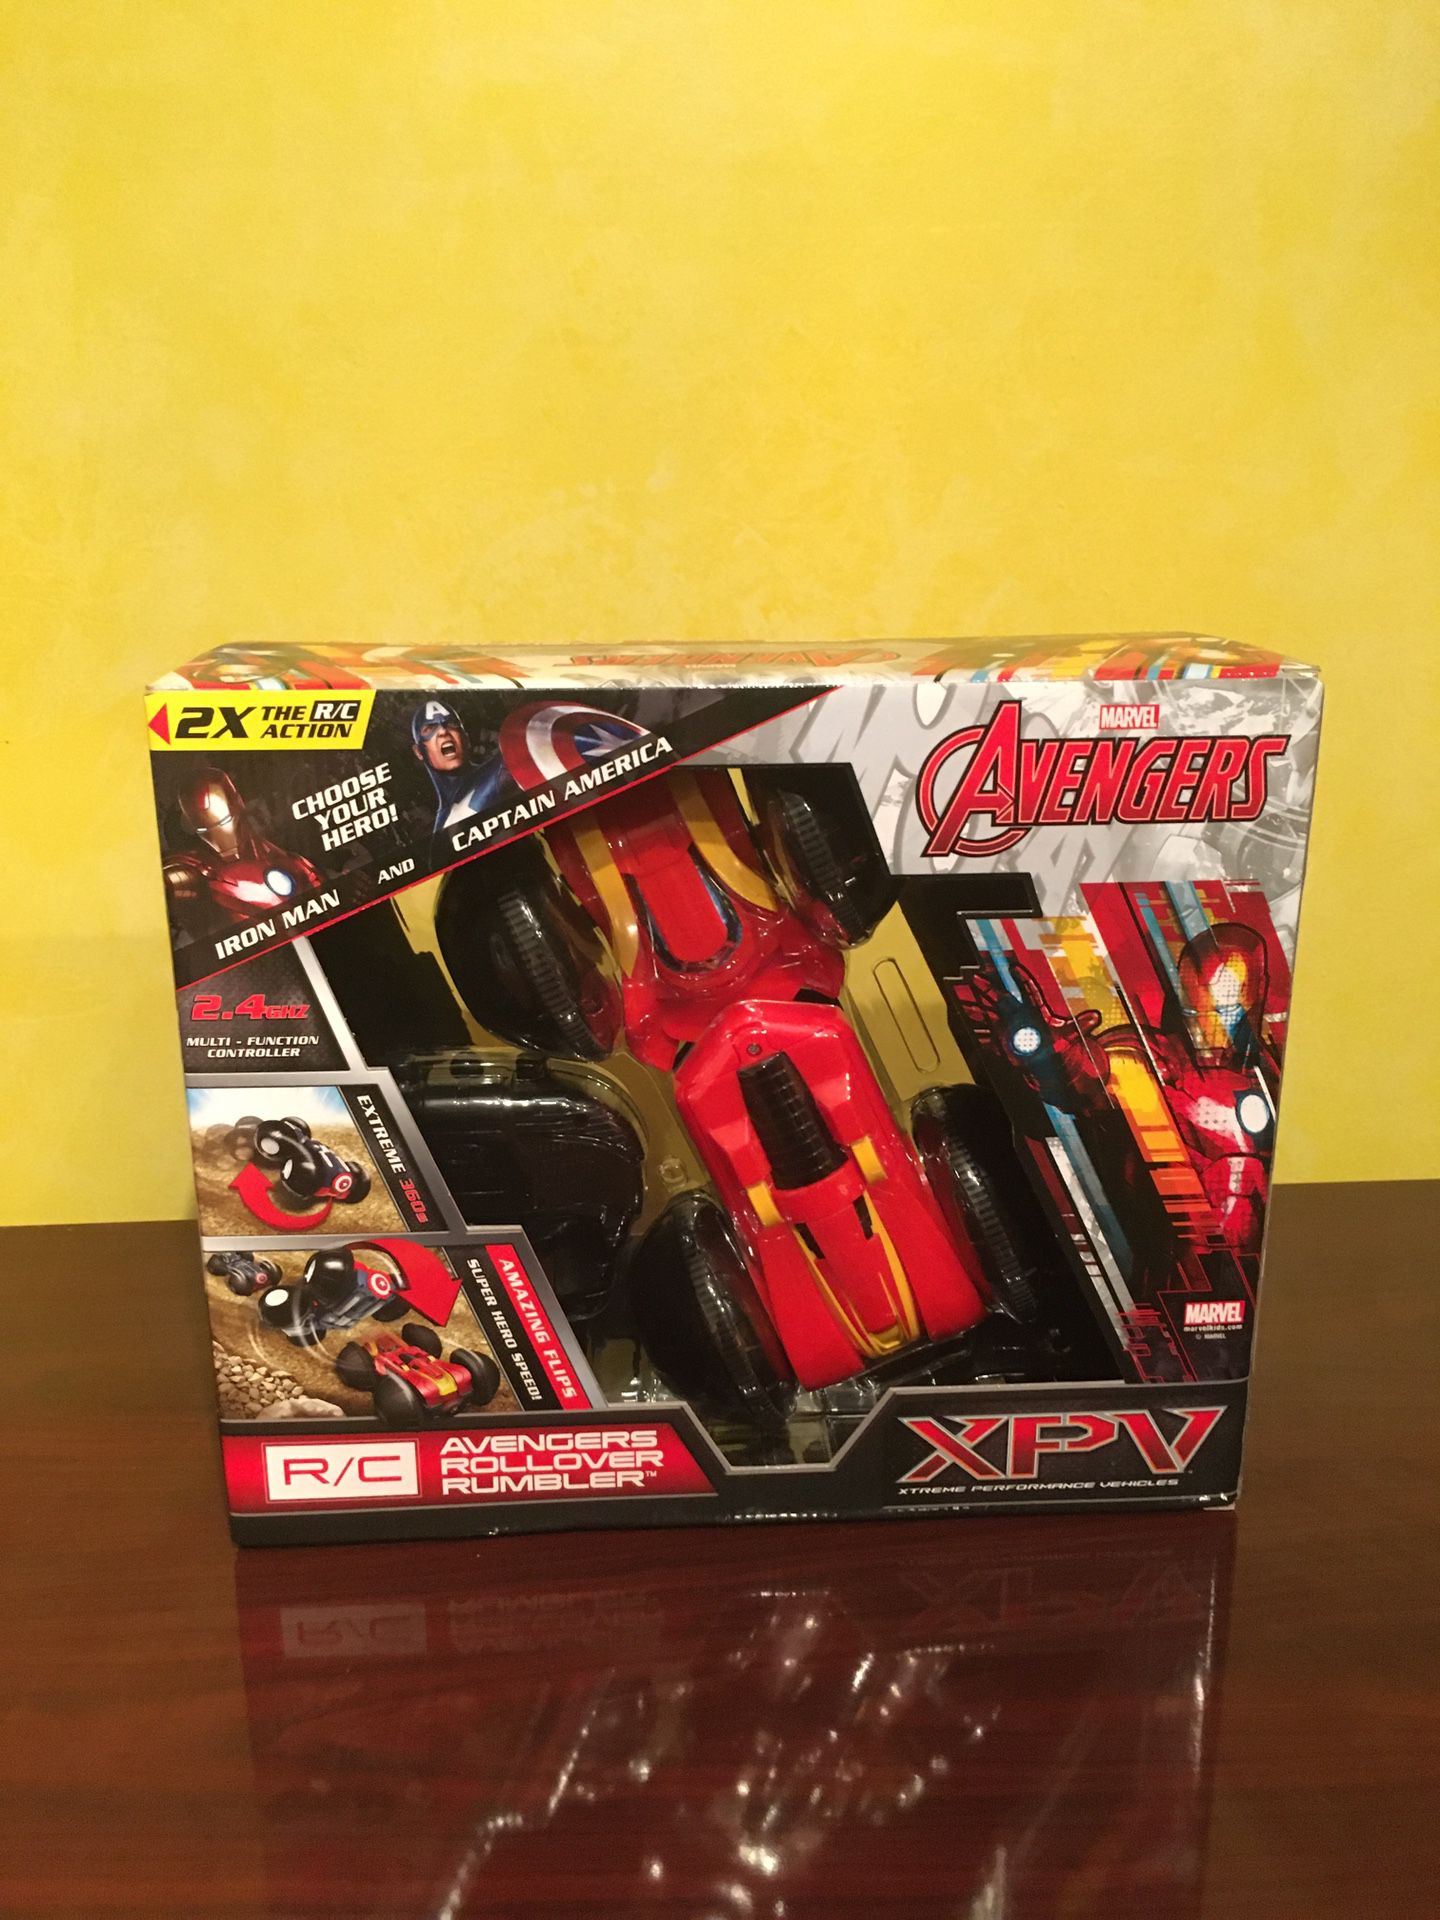 Avengers R/C Rollover Rumbler (Captain America and Ironman)